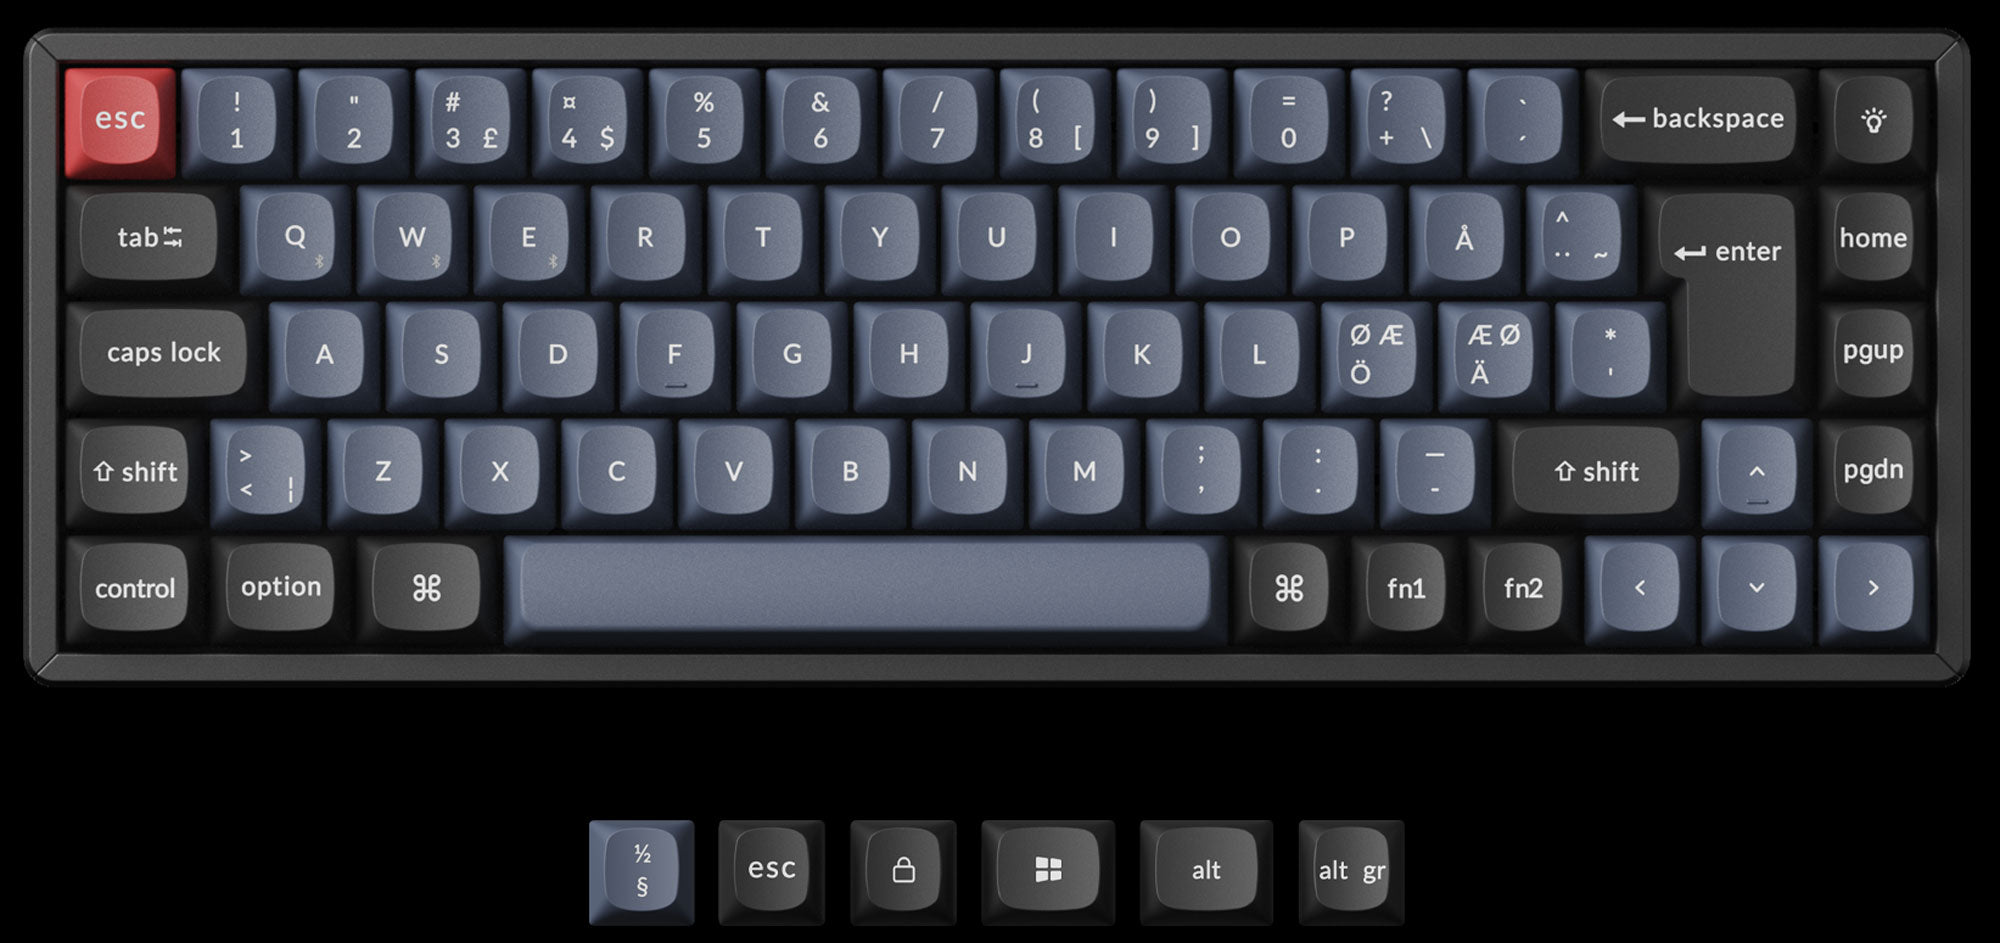 Keychron-K6-Pro-QMK-VIA-Wireless-Custom-Mechanical-Keyboard-65-percent-layout-for-Mac-Windows-Linux-PCB-screw-in-stabilizer-and-hot-swappable-K-Pro-mechanical-switch-Nordic-ISO-Layout-PBT.jpg__PID:4386f021-615c-4980-965b-2e9a7ef662c9